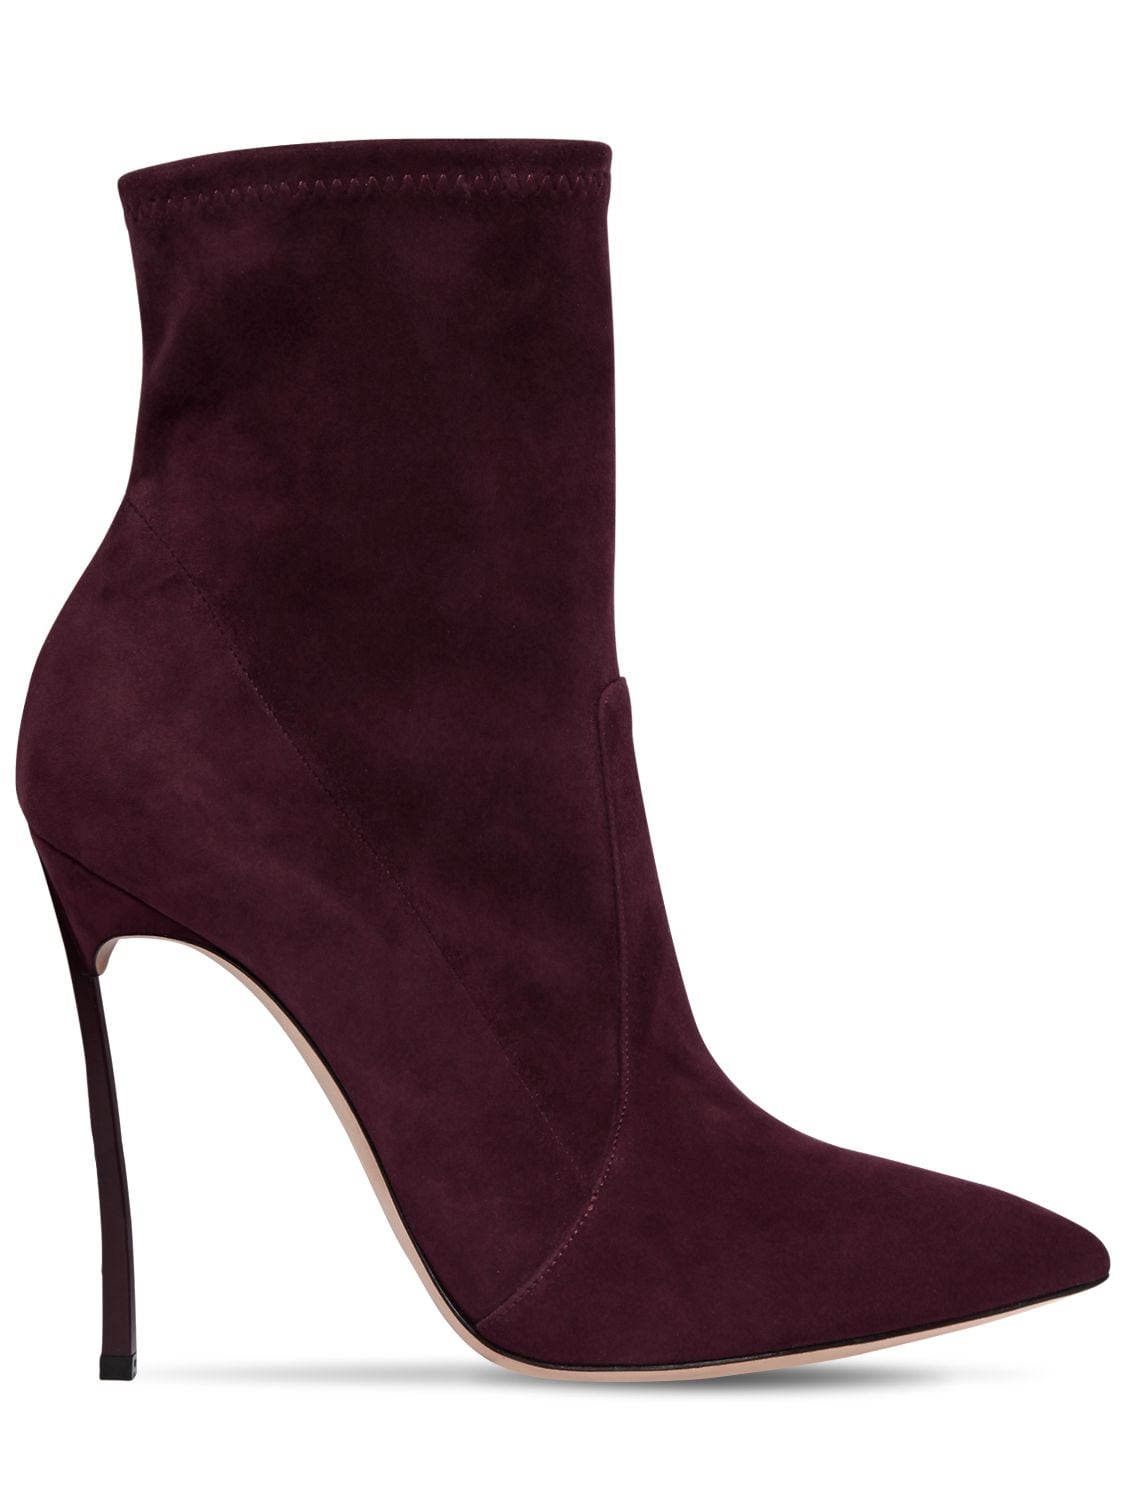 Casadei 100mm Blade Stretch Suede Ankle Boots In Bordeaux